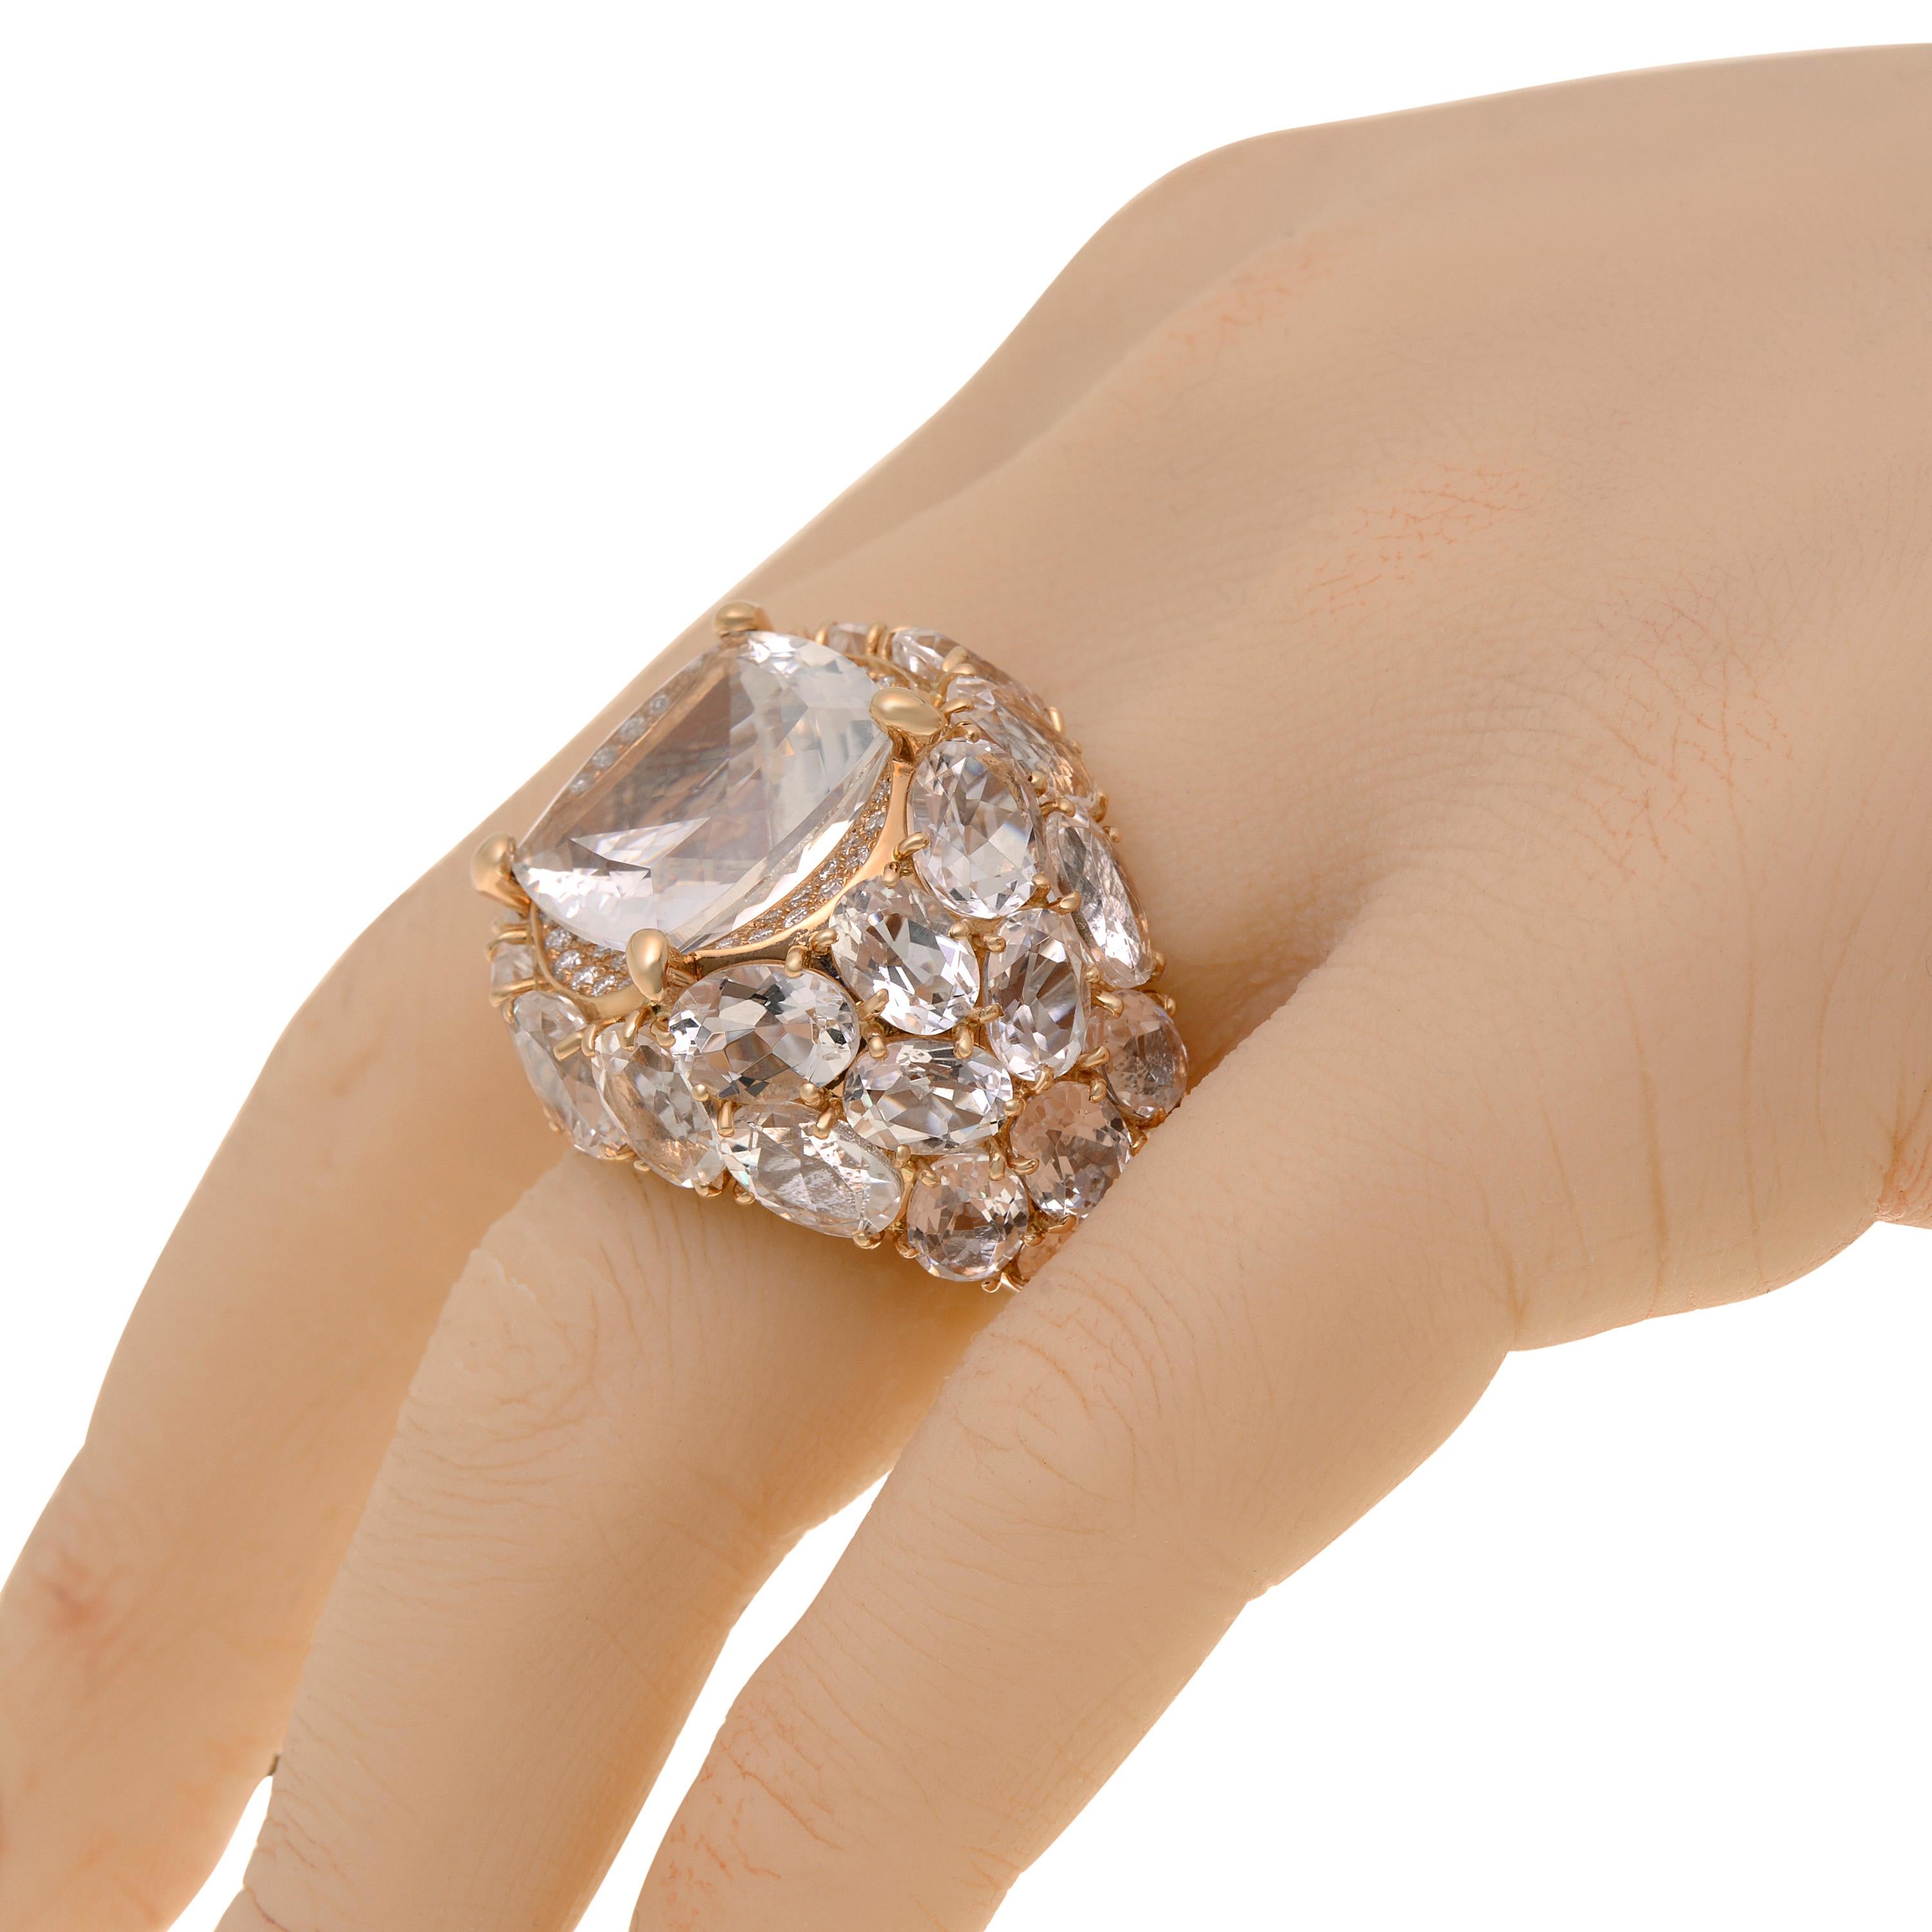 This bejeweled Mimi Milano 18K rose gold statement ring features rock crystal and 0.44ct. tw. diamonds set in 18K rose gold. The ring size is 6.5 (54.5 - 53). The band width is 3/8